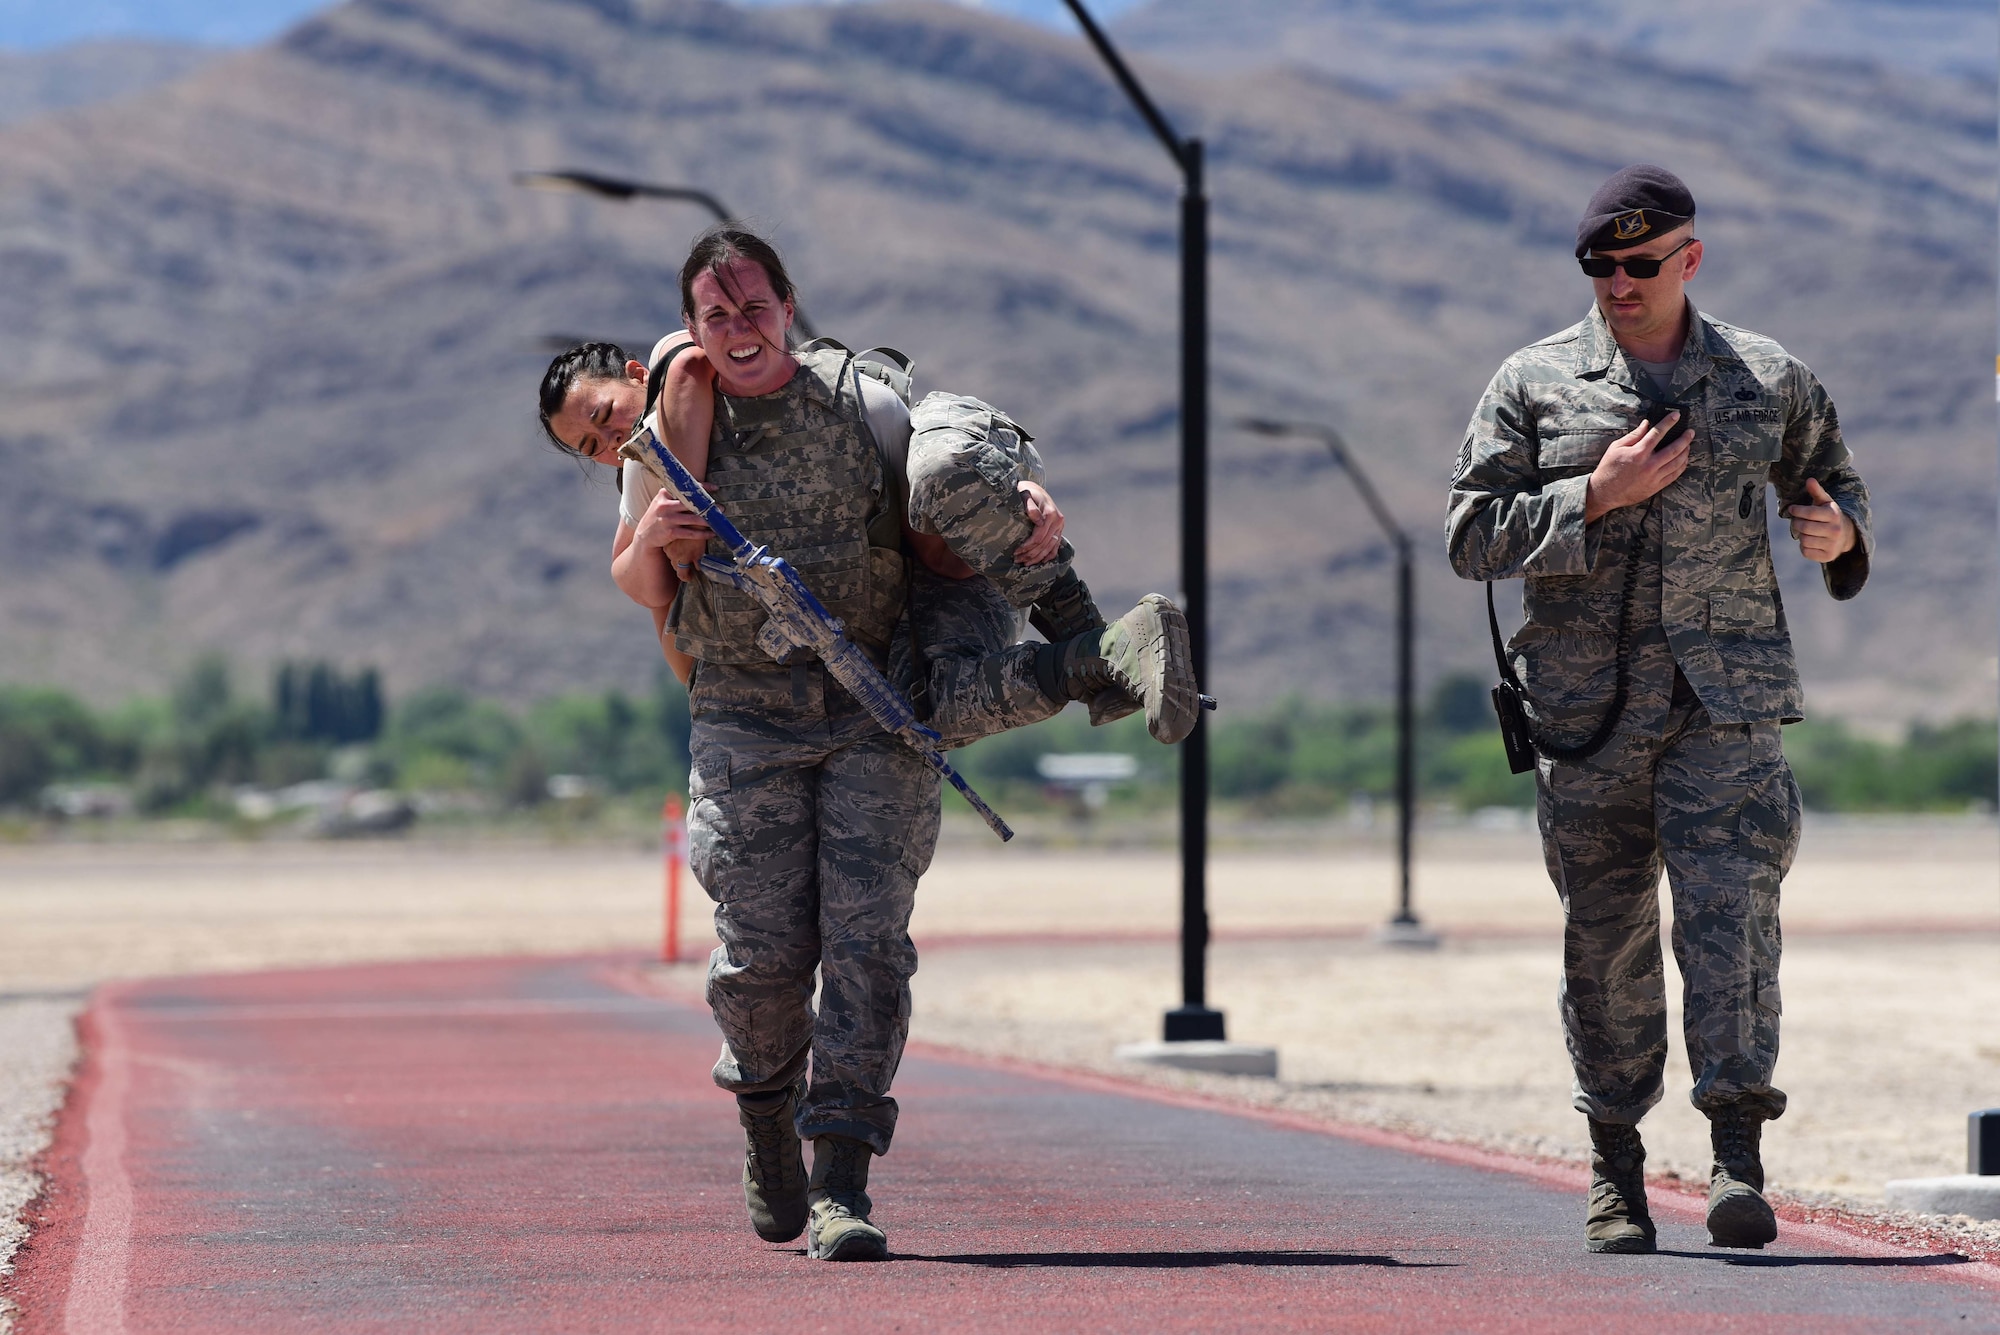 Capt. Sarah, 799th Air Base Squadron Force Support Flight chief, carries 1st Lt. Ryann, 799th ABS Military Personnel Flight commander, during a police week defender challenge